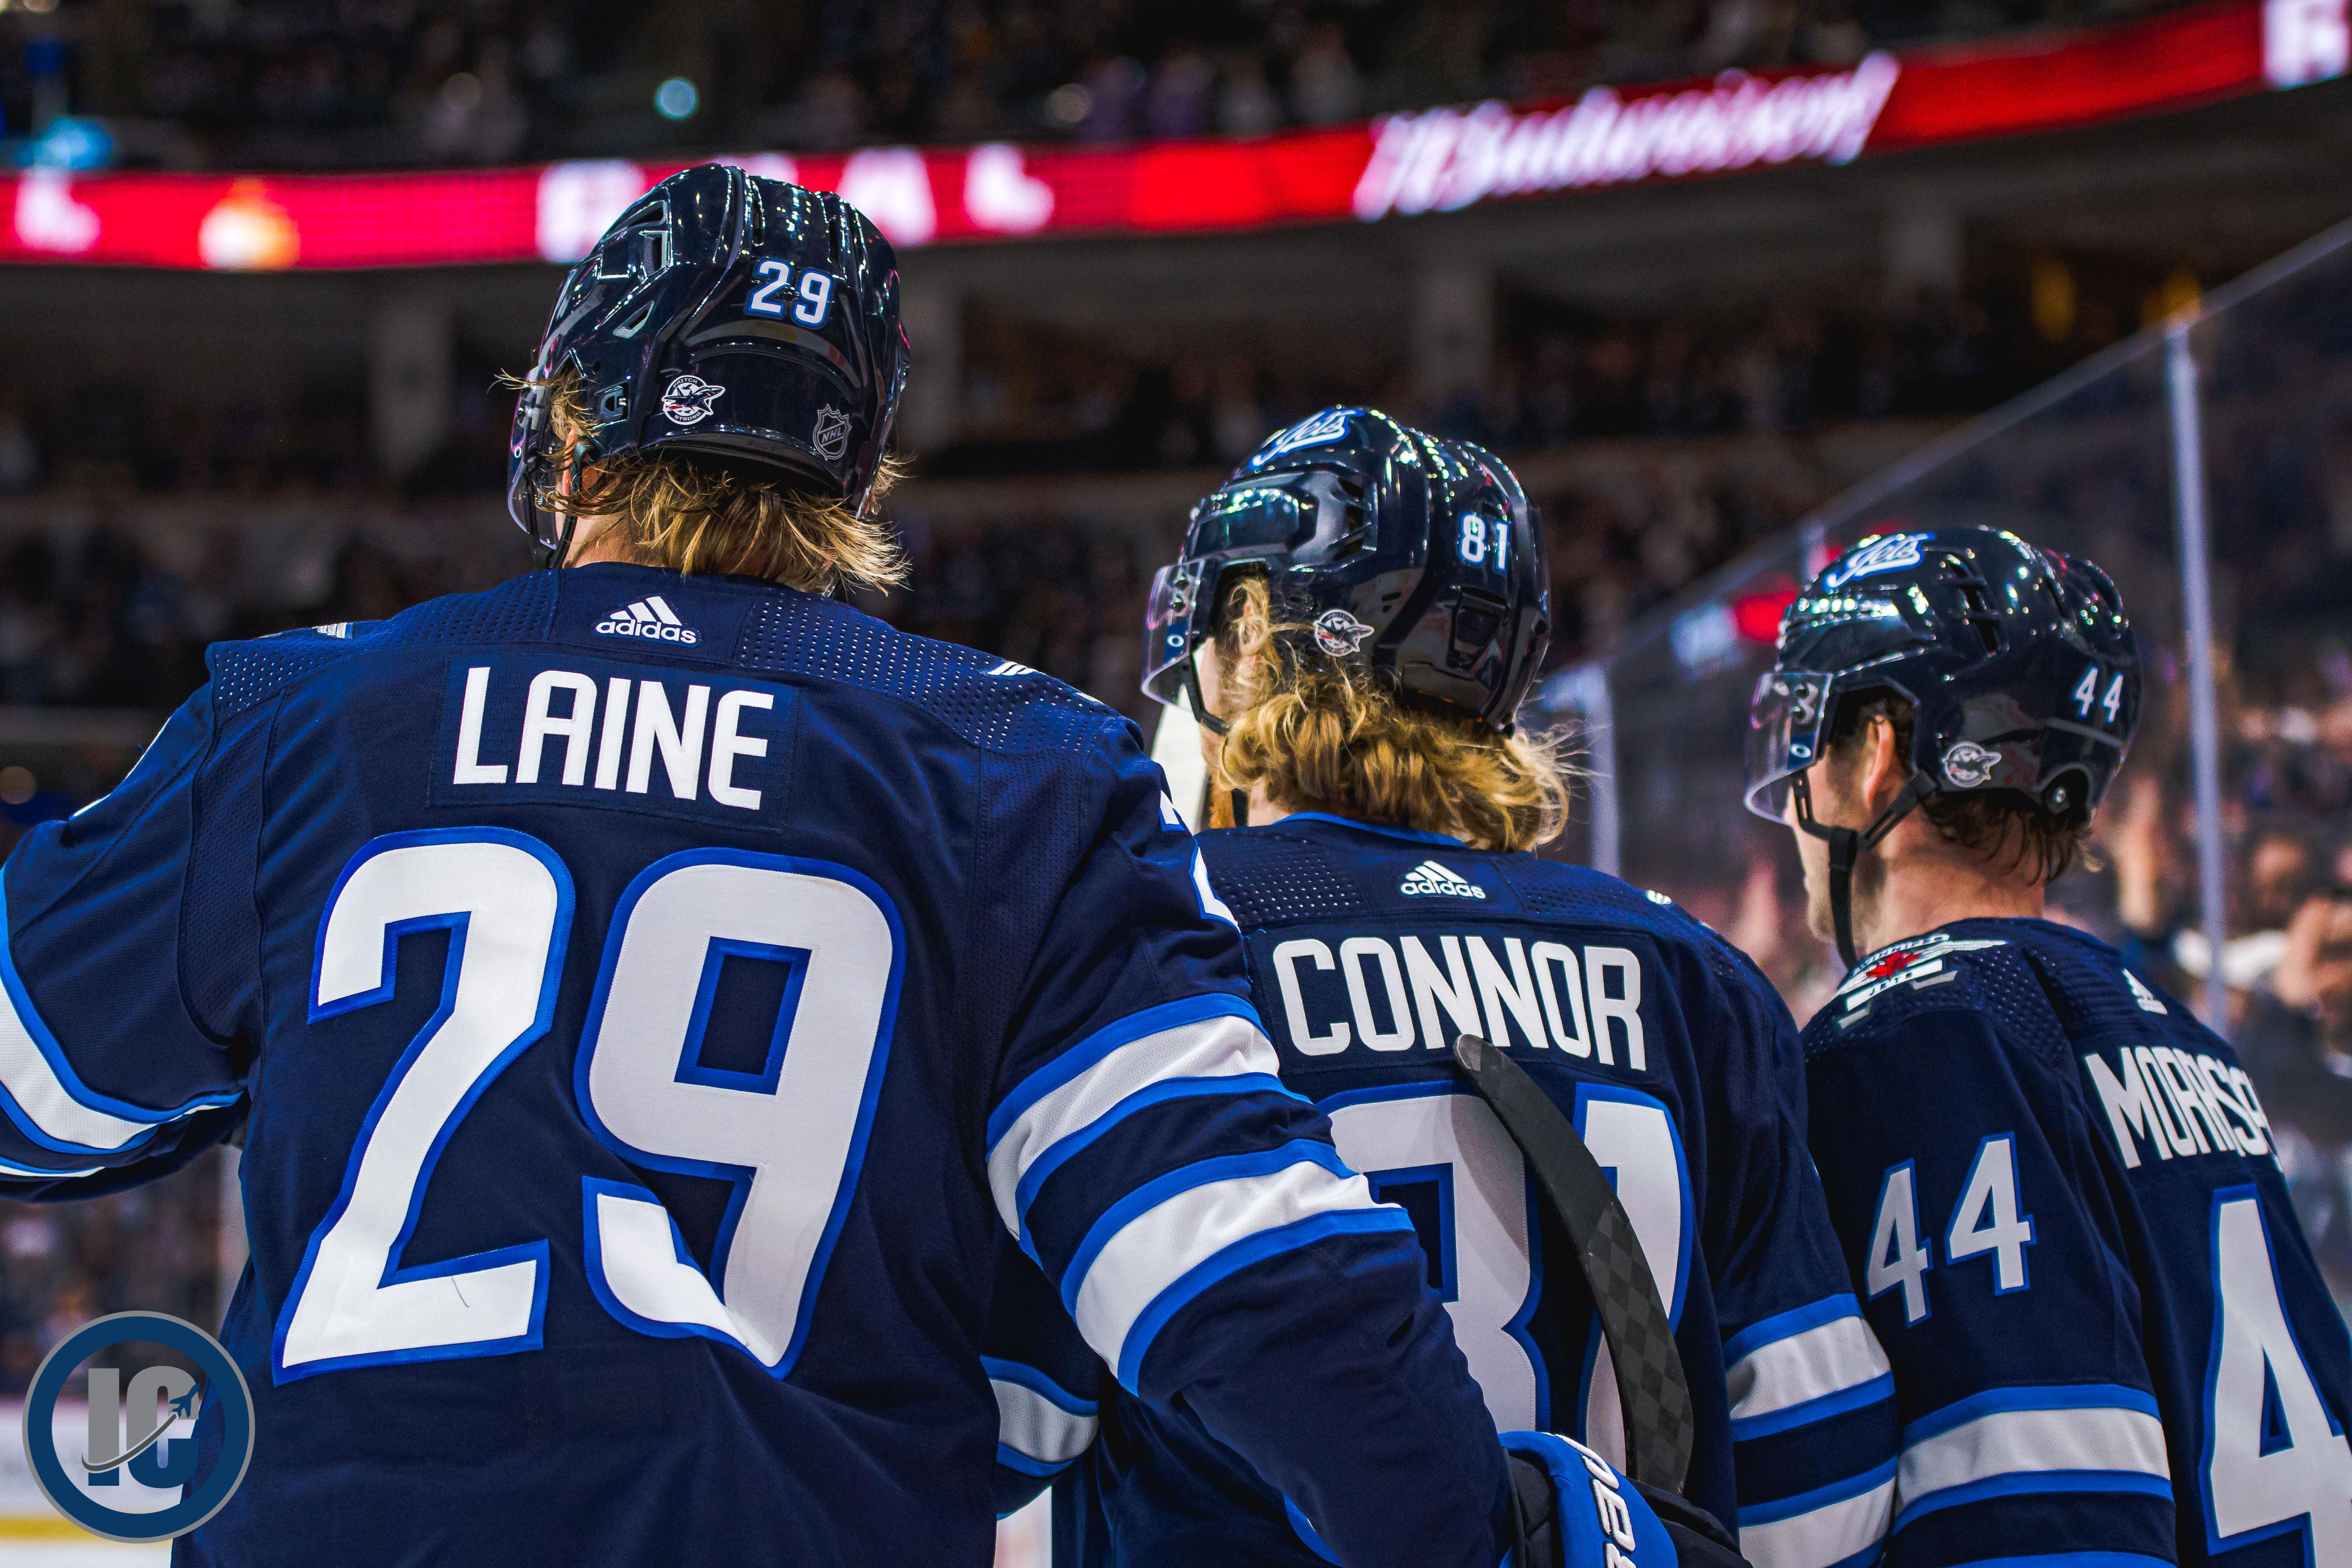 Laine Connor and Morrissey